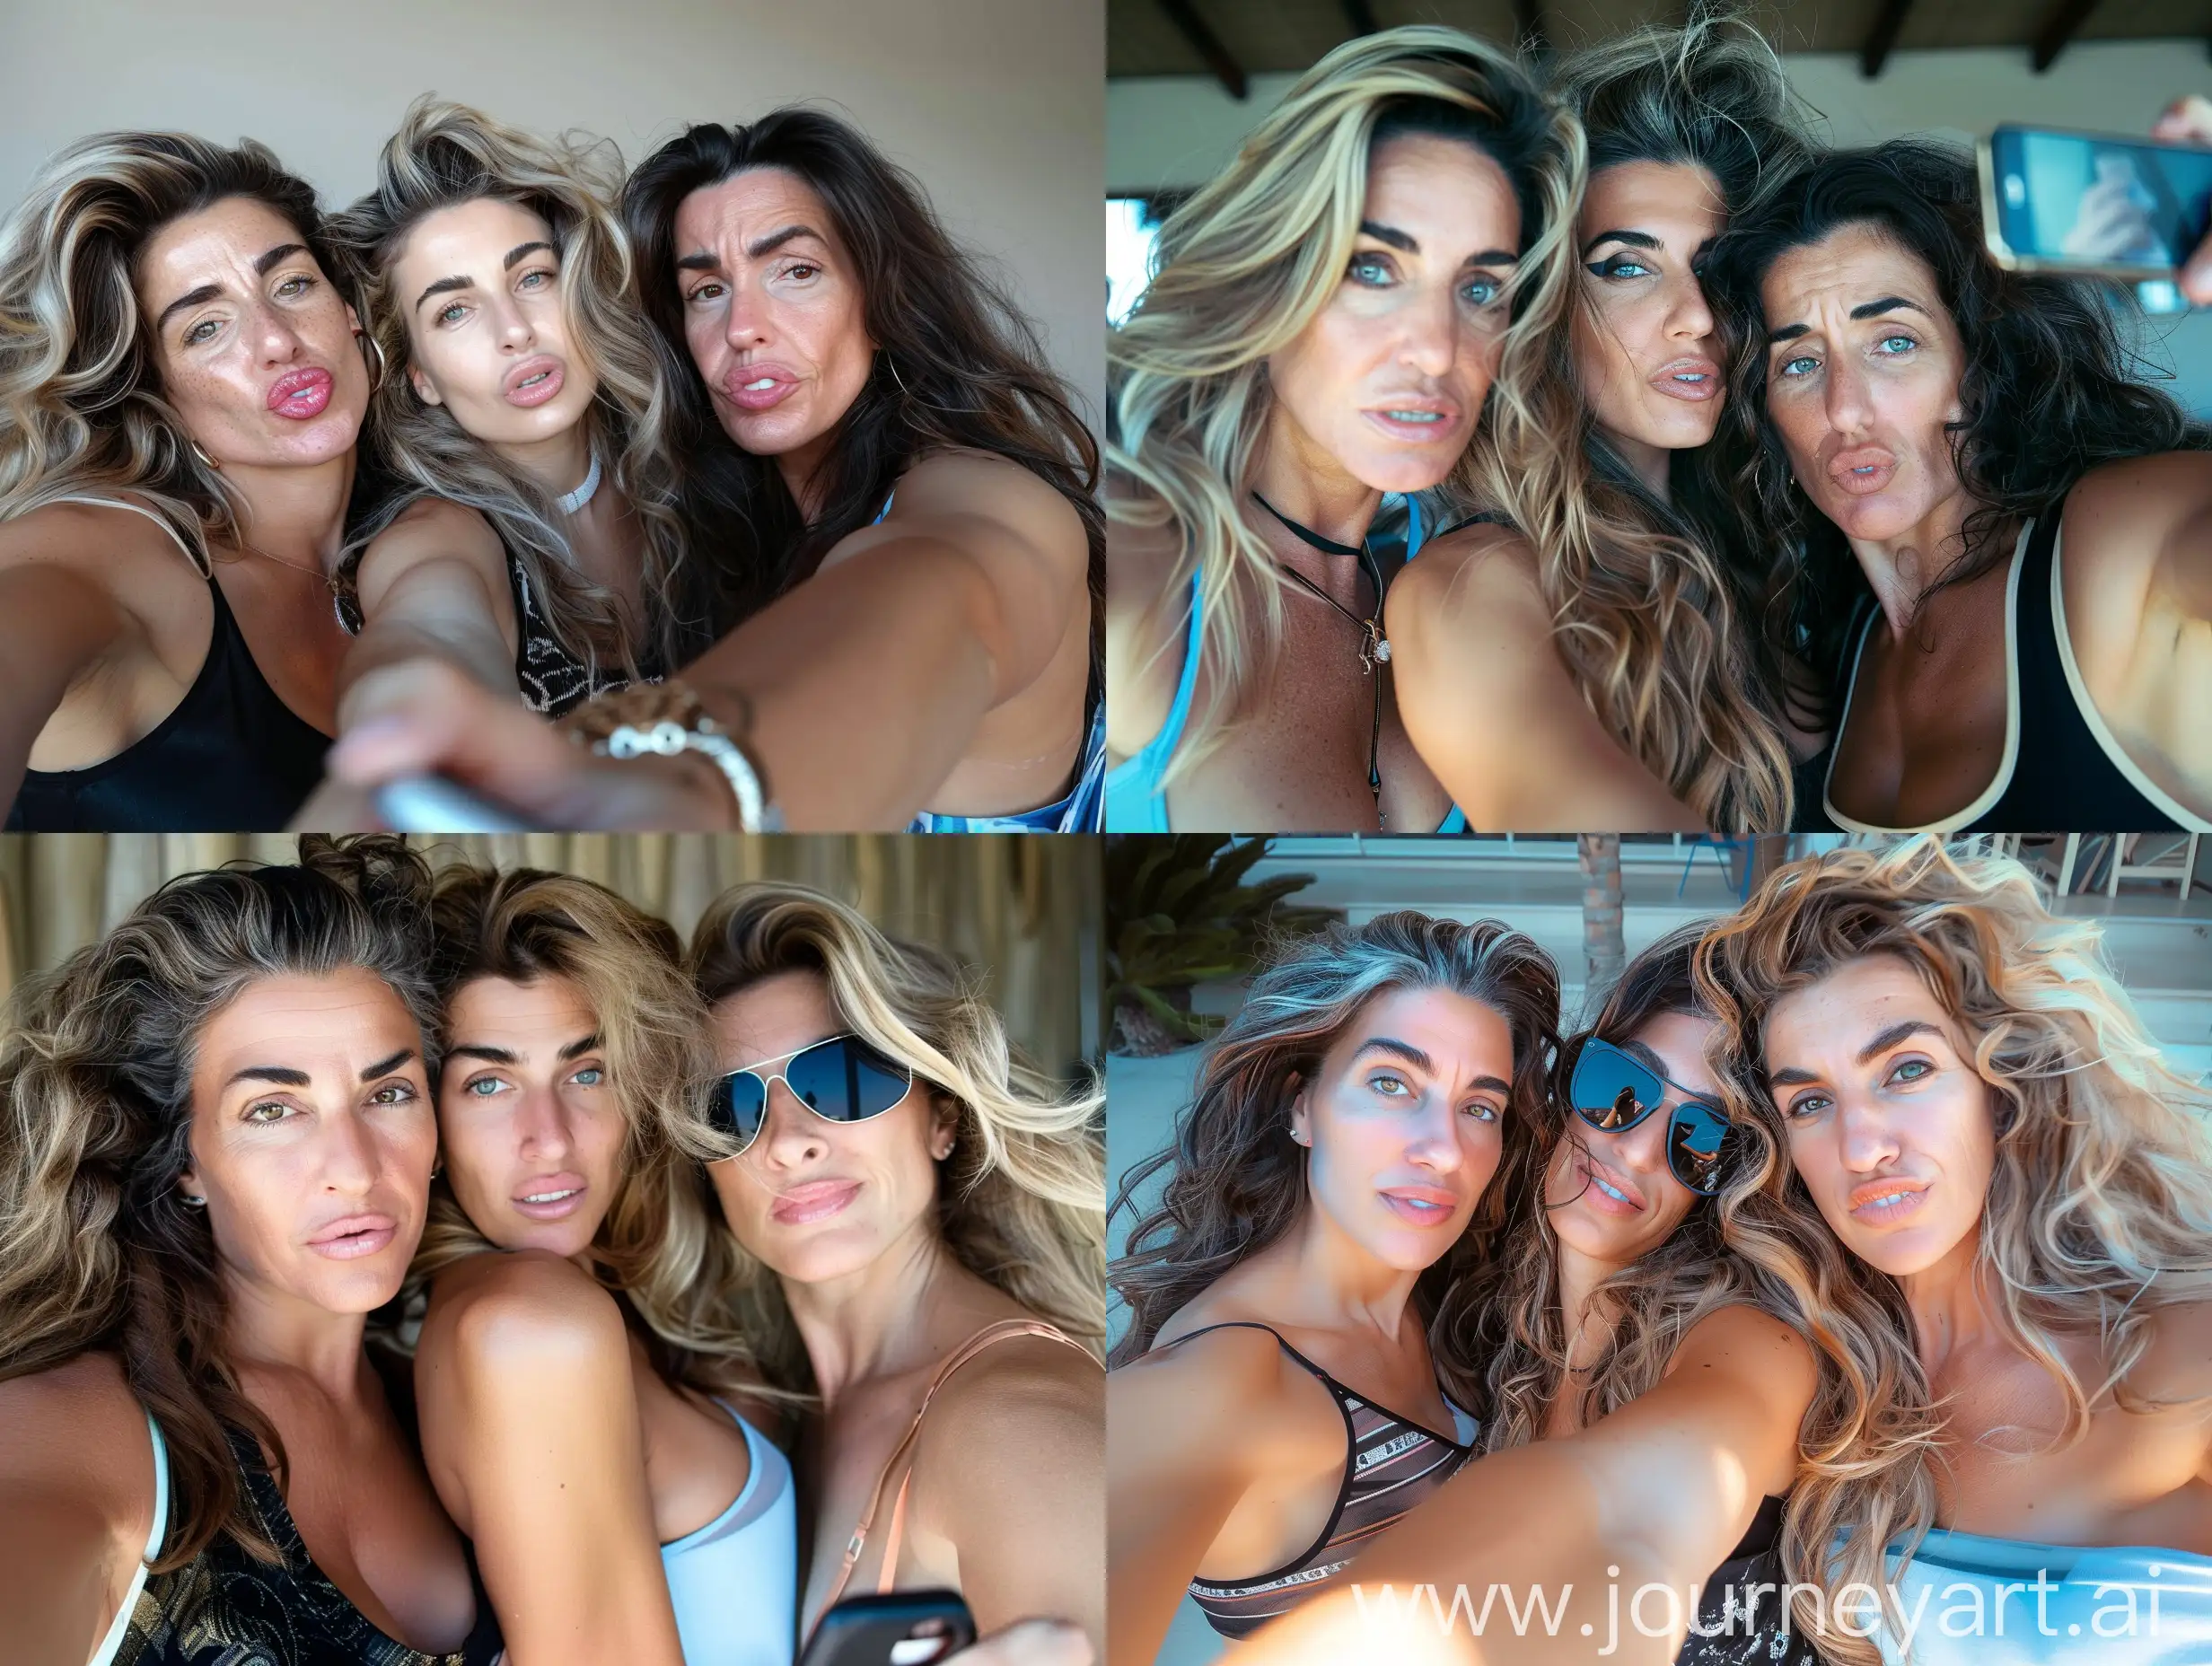 Three super model women, young, gorgeous, taking selfie together